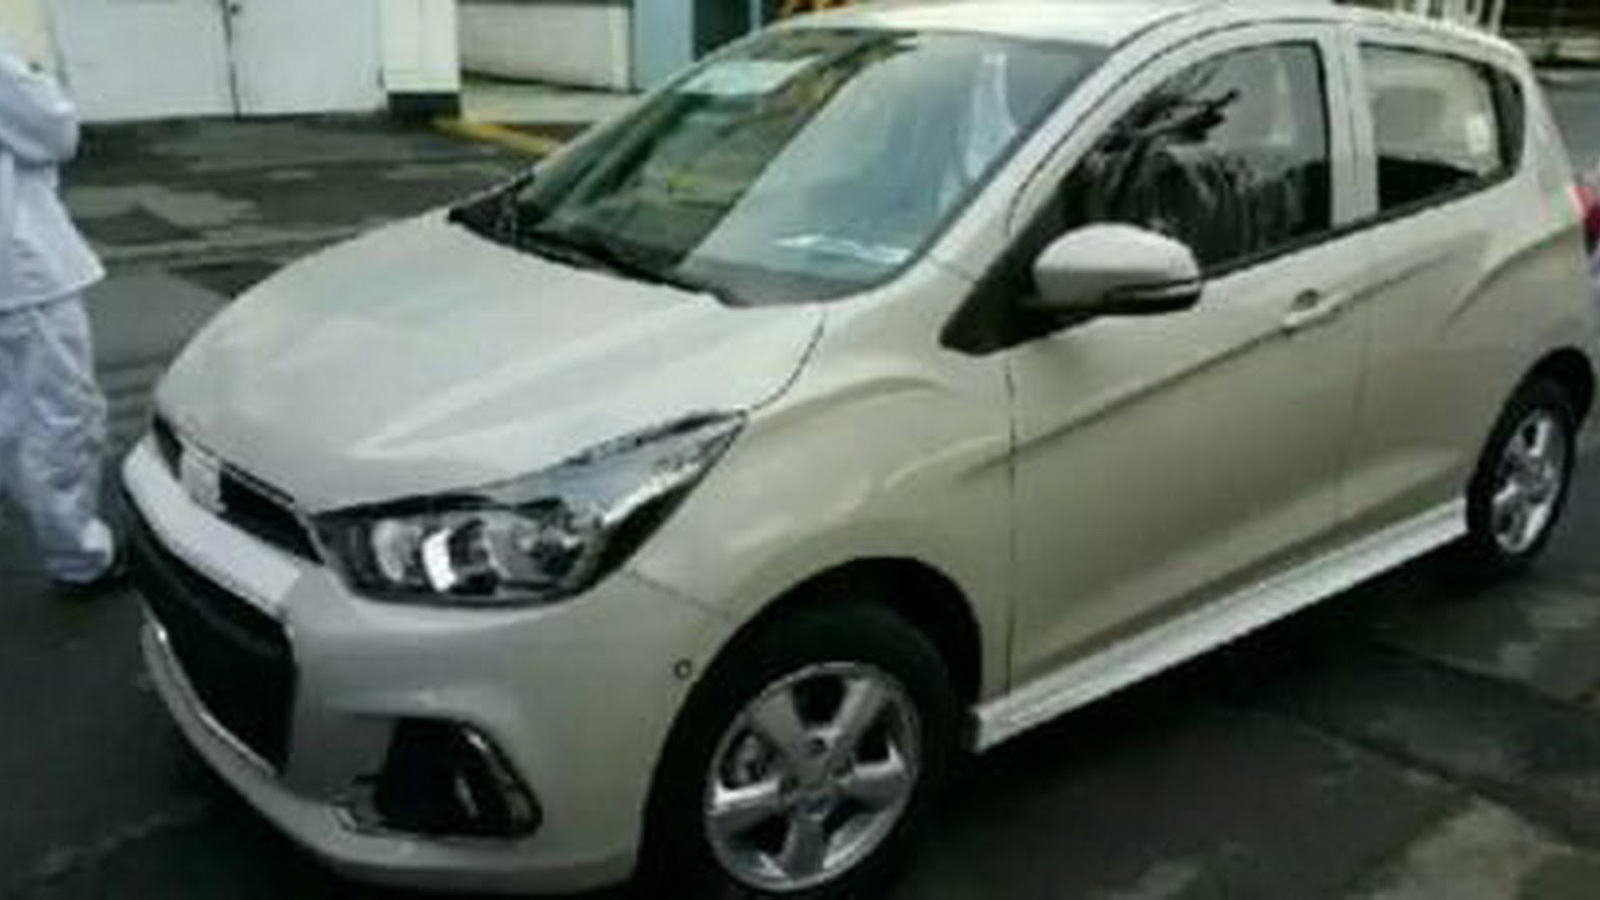 2017 Chevrolet Spark: Photos Of Updated Minicar Leaked In Korea